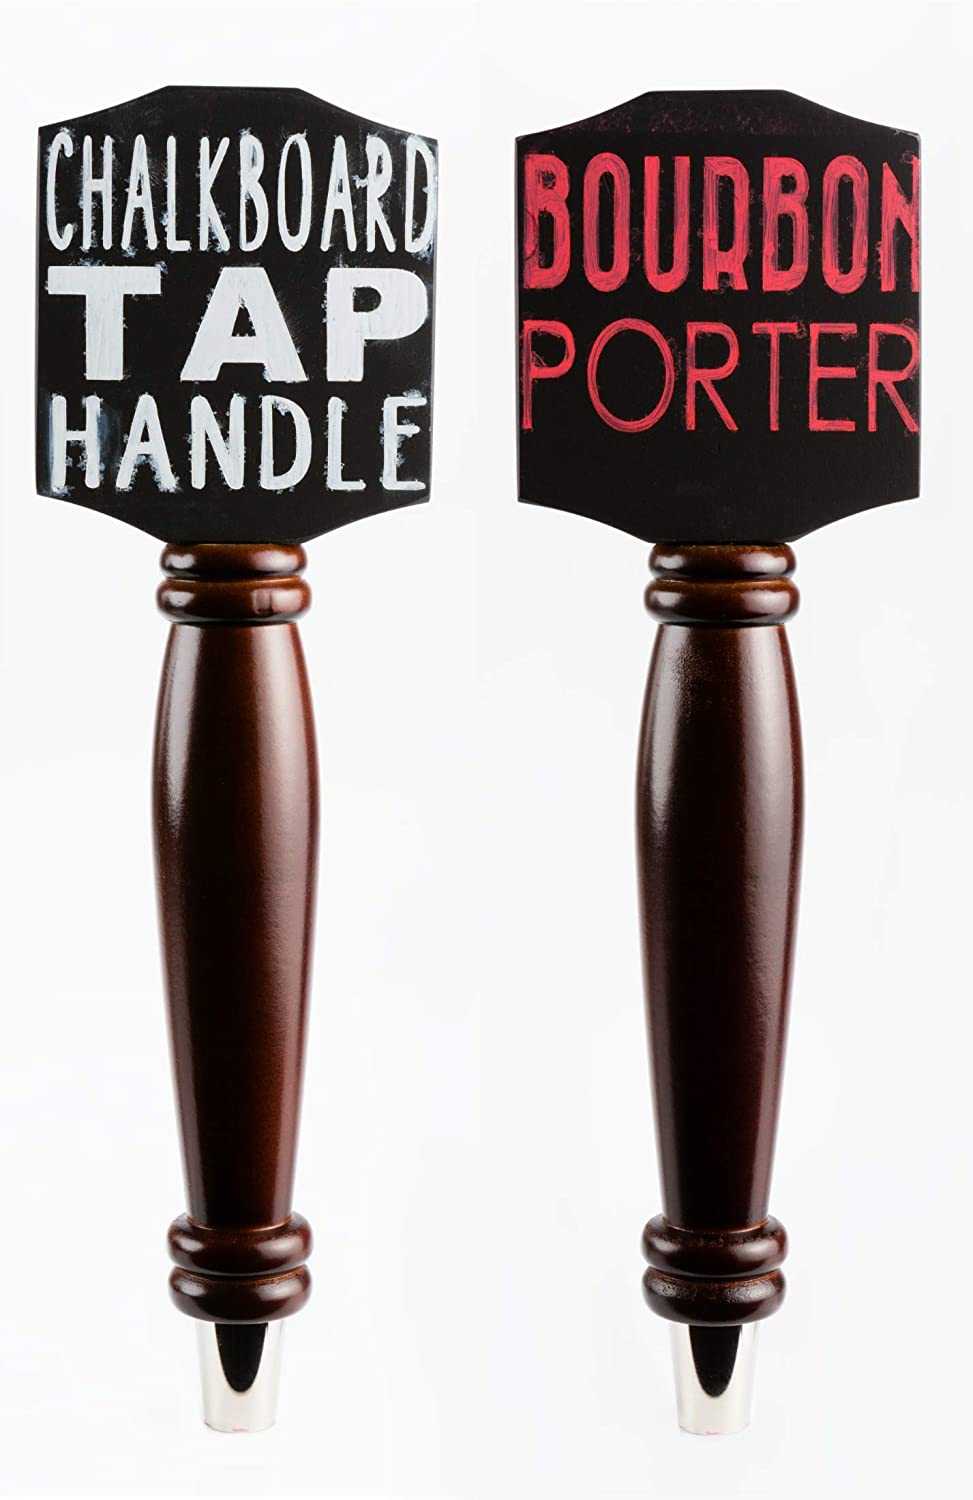 Chalk board tap handles are great to gift to any beer lover with a home kegerator.